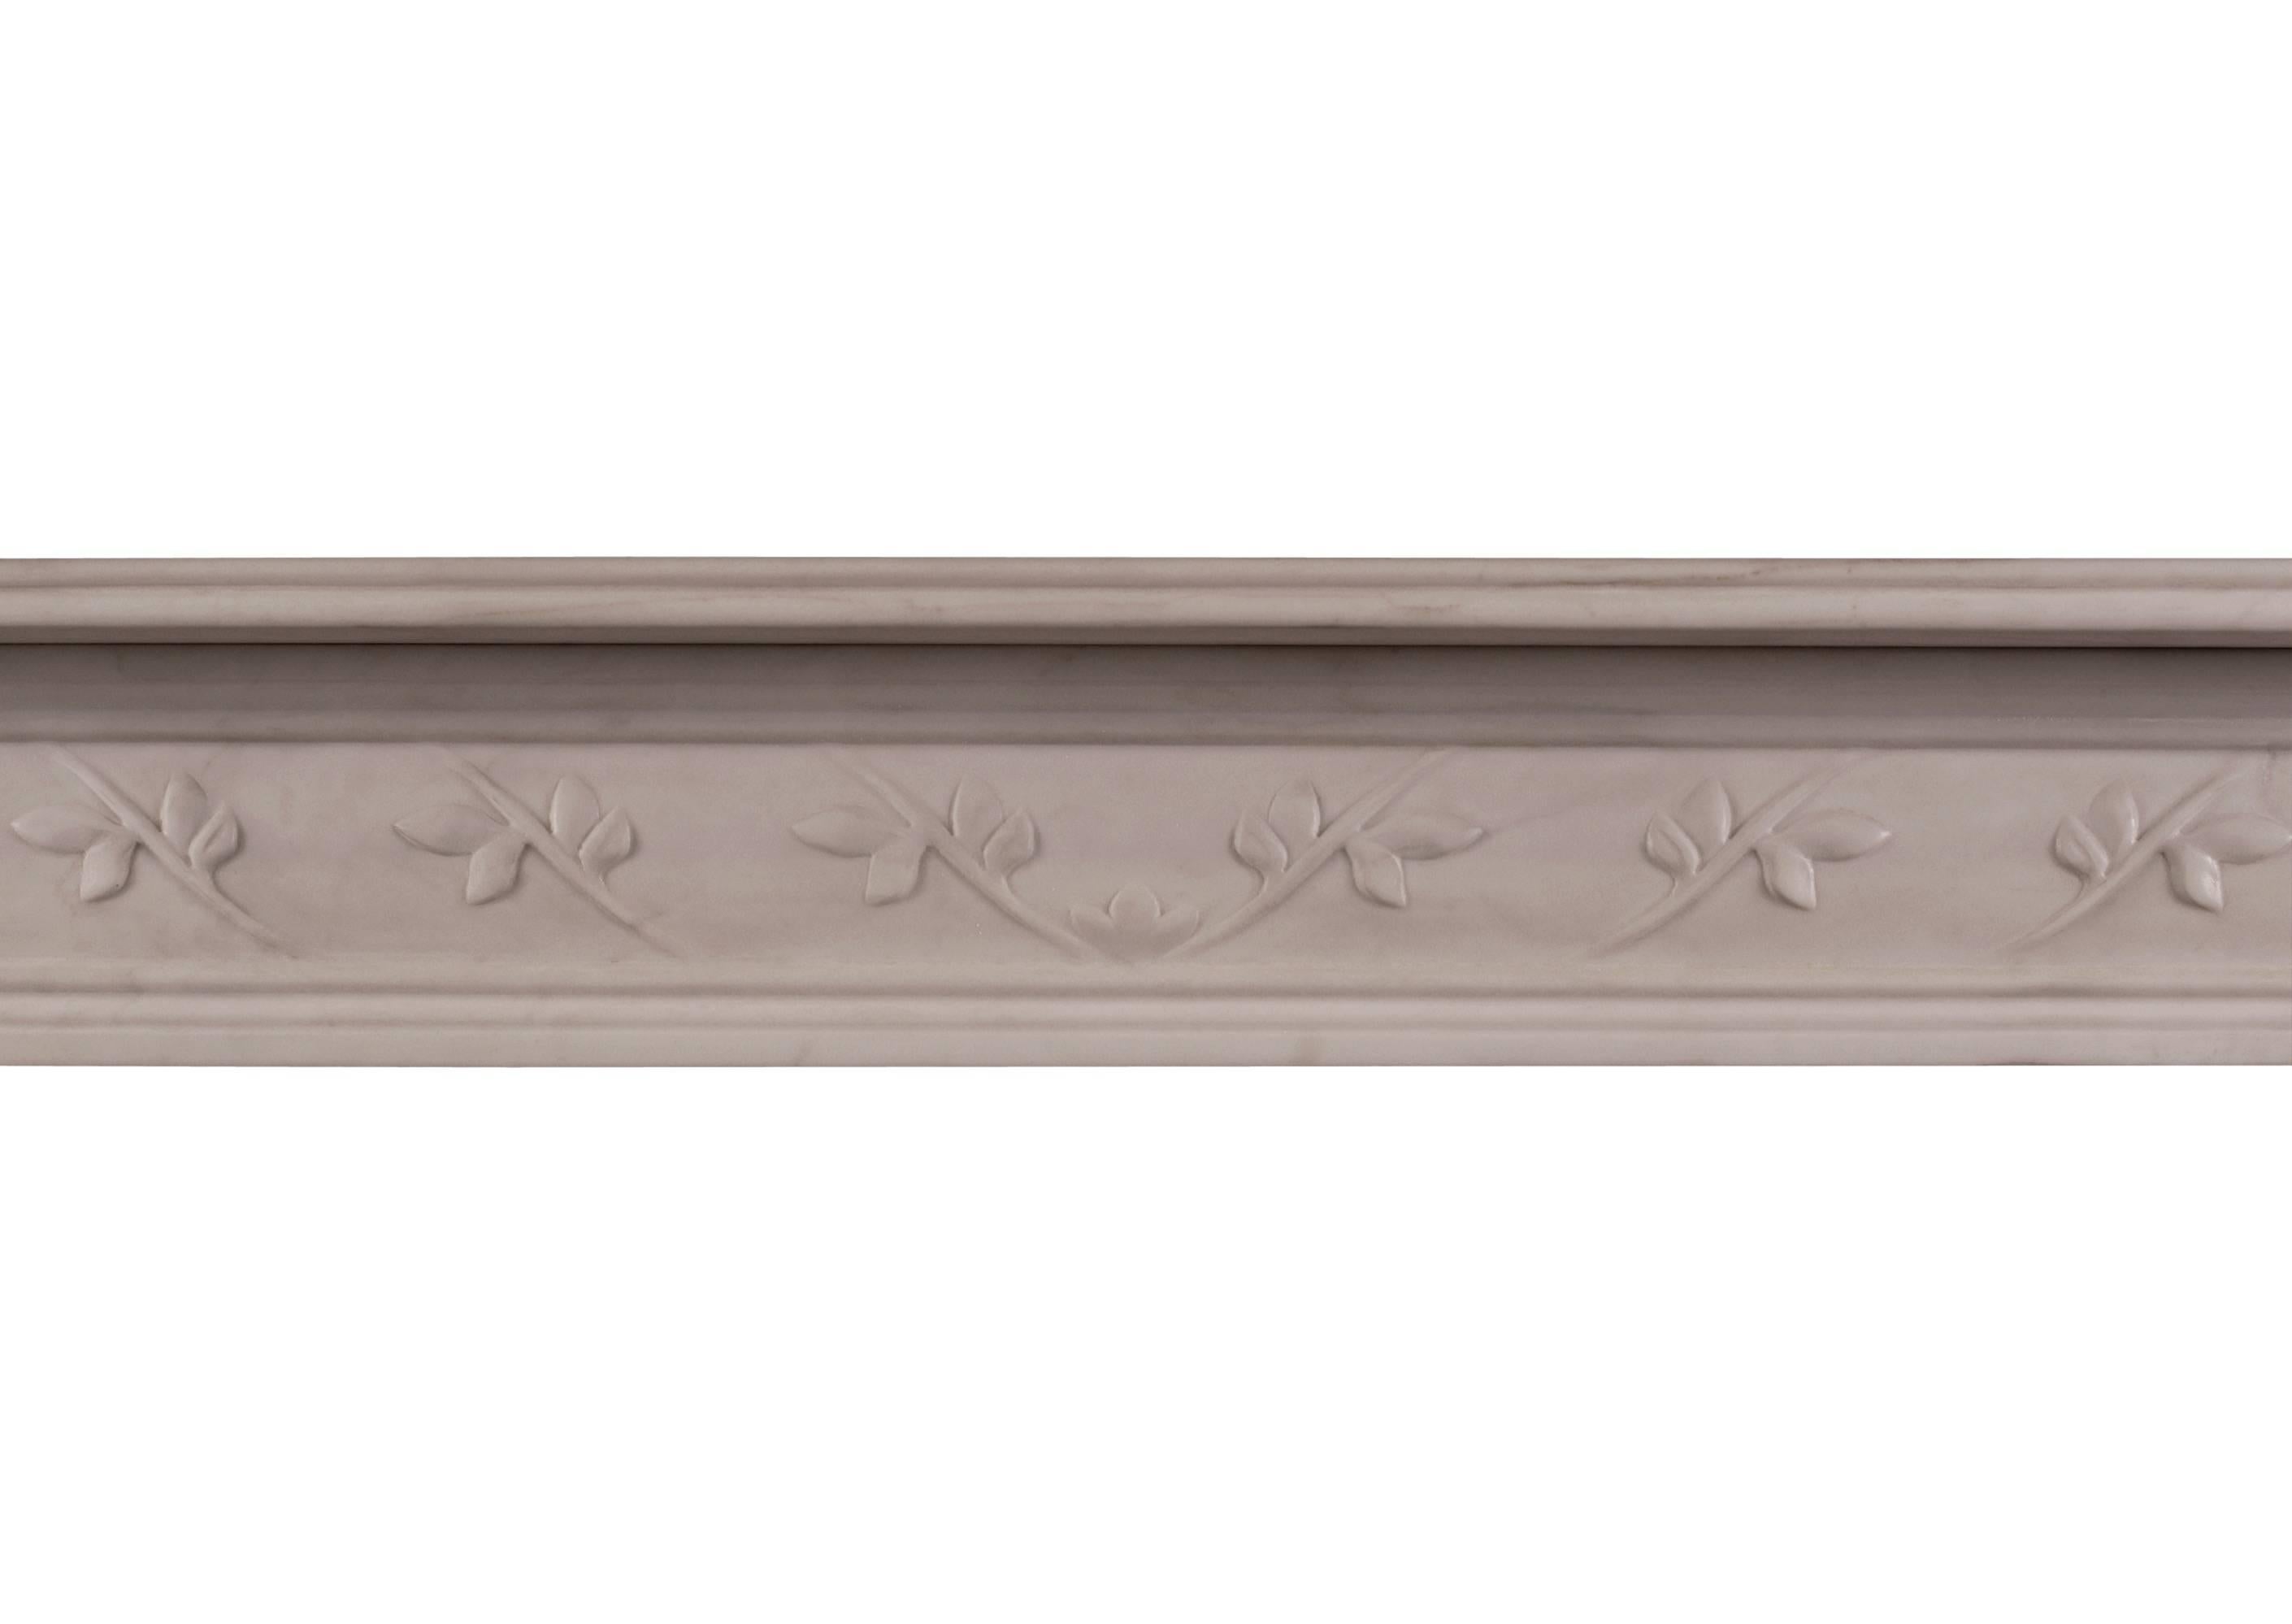 A delicate English Regency white marble fireplace. The reeded frieze and jambs with carved floral motif to centre. Round paterae of floral design to end blockings. Reeded shelf. A quality copy of an original piece.

Shelf width - 1425 mm / 56 1/8